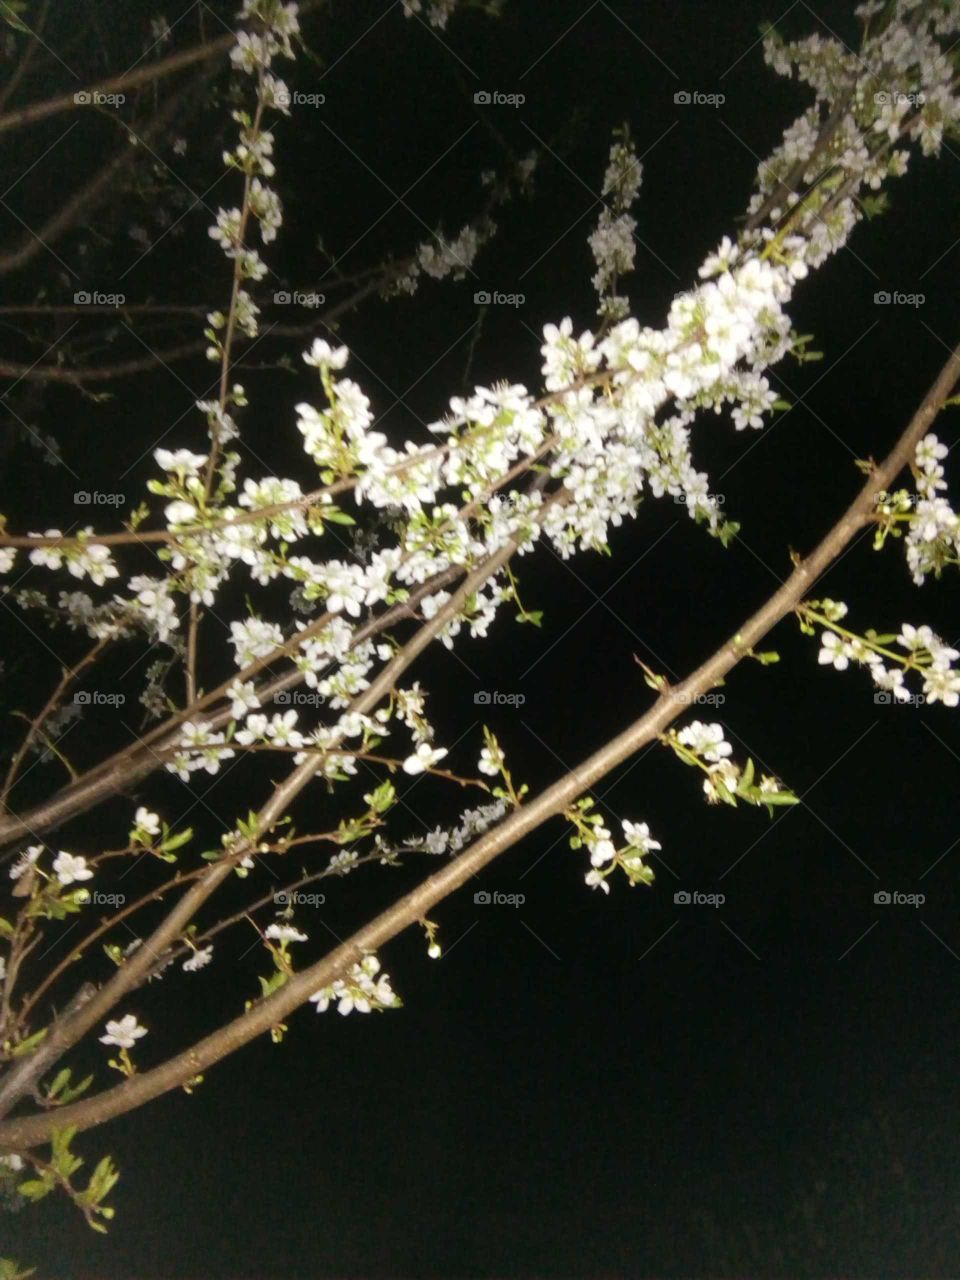 In Bloom by night